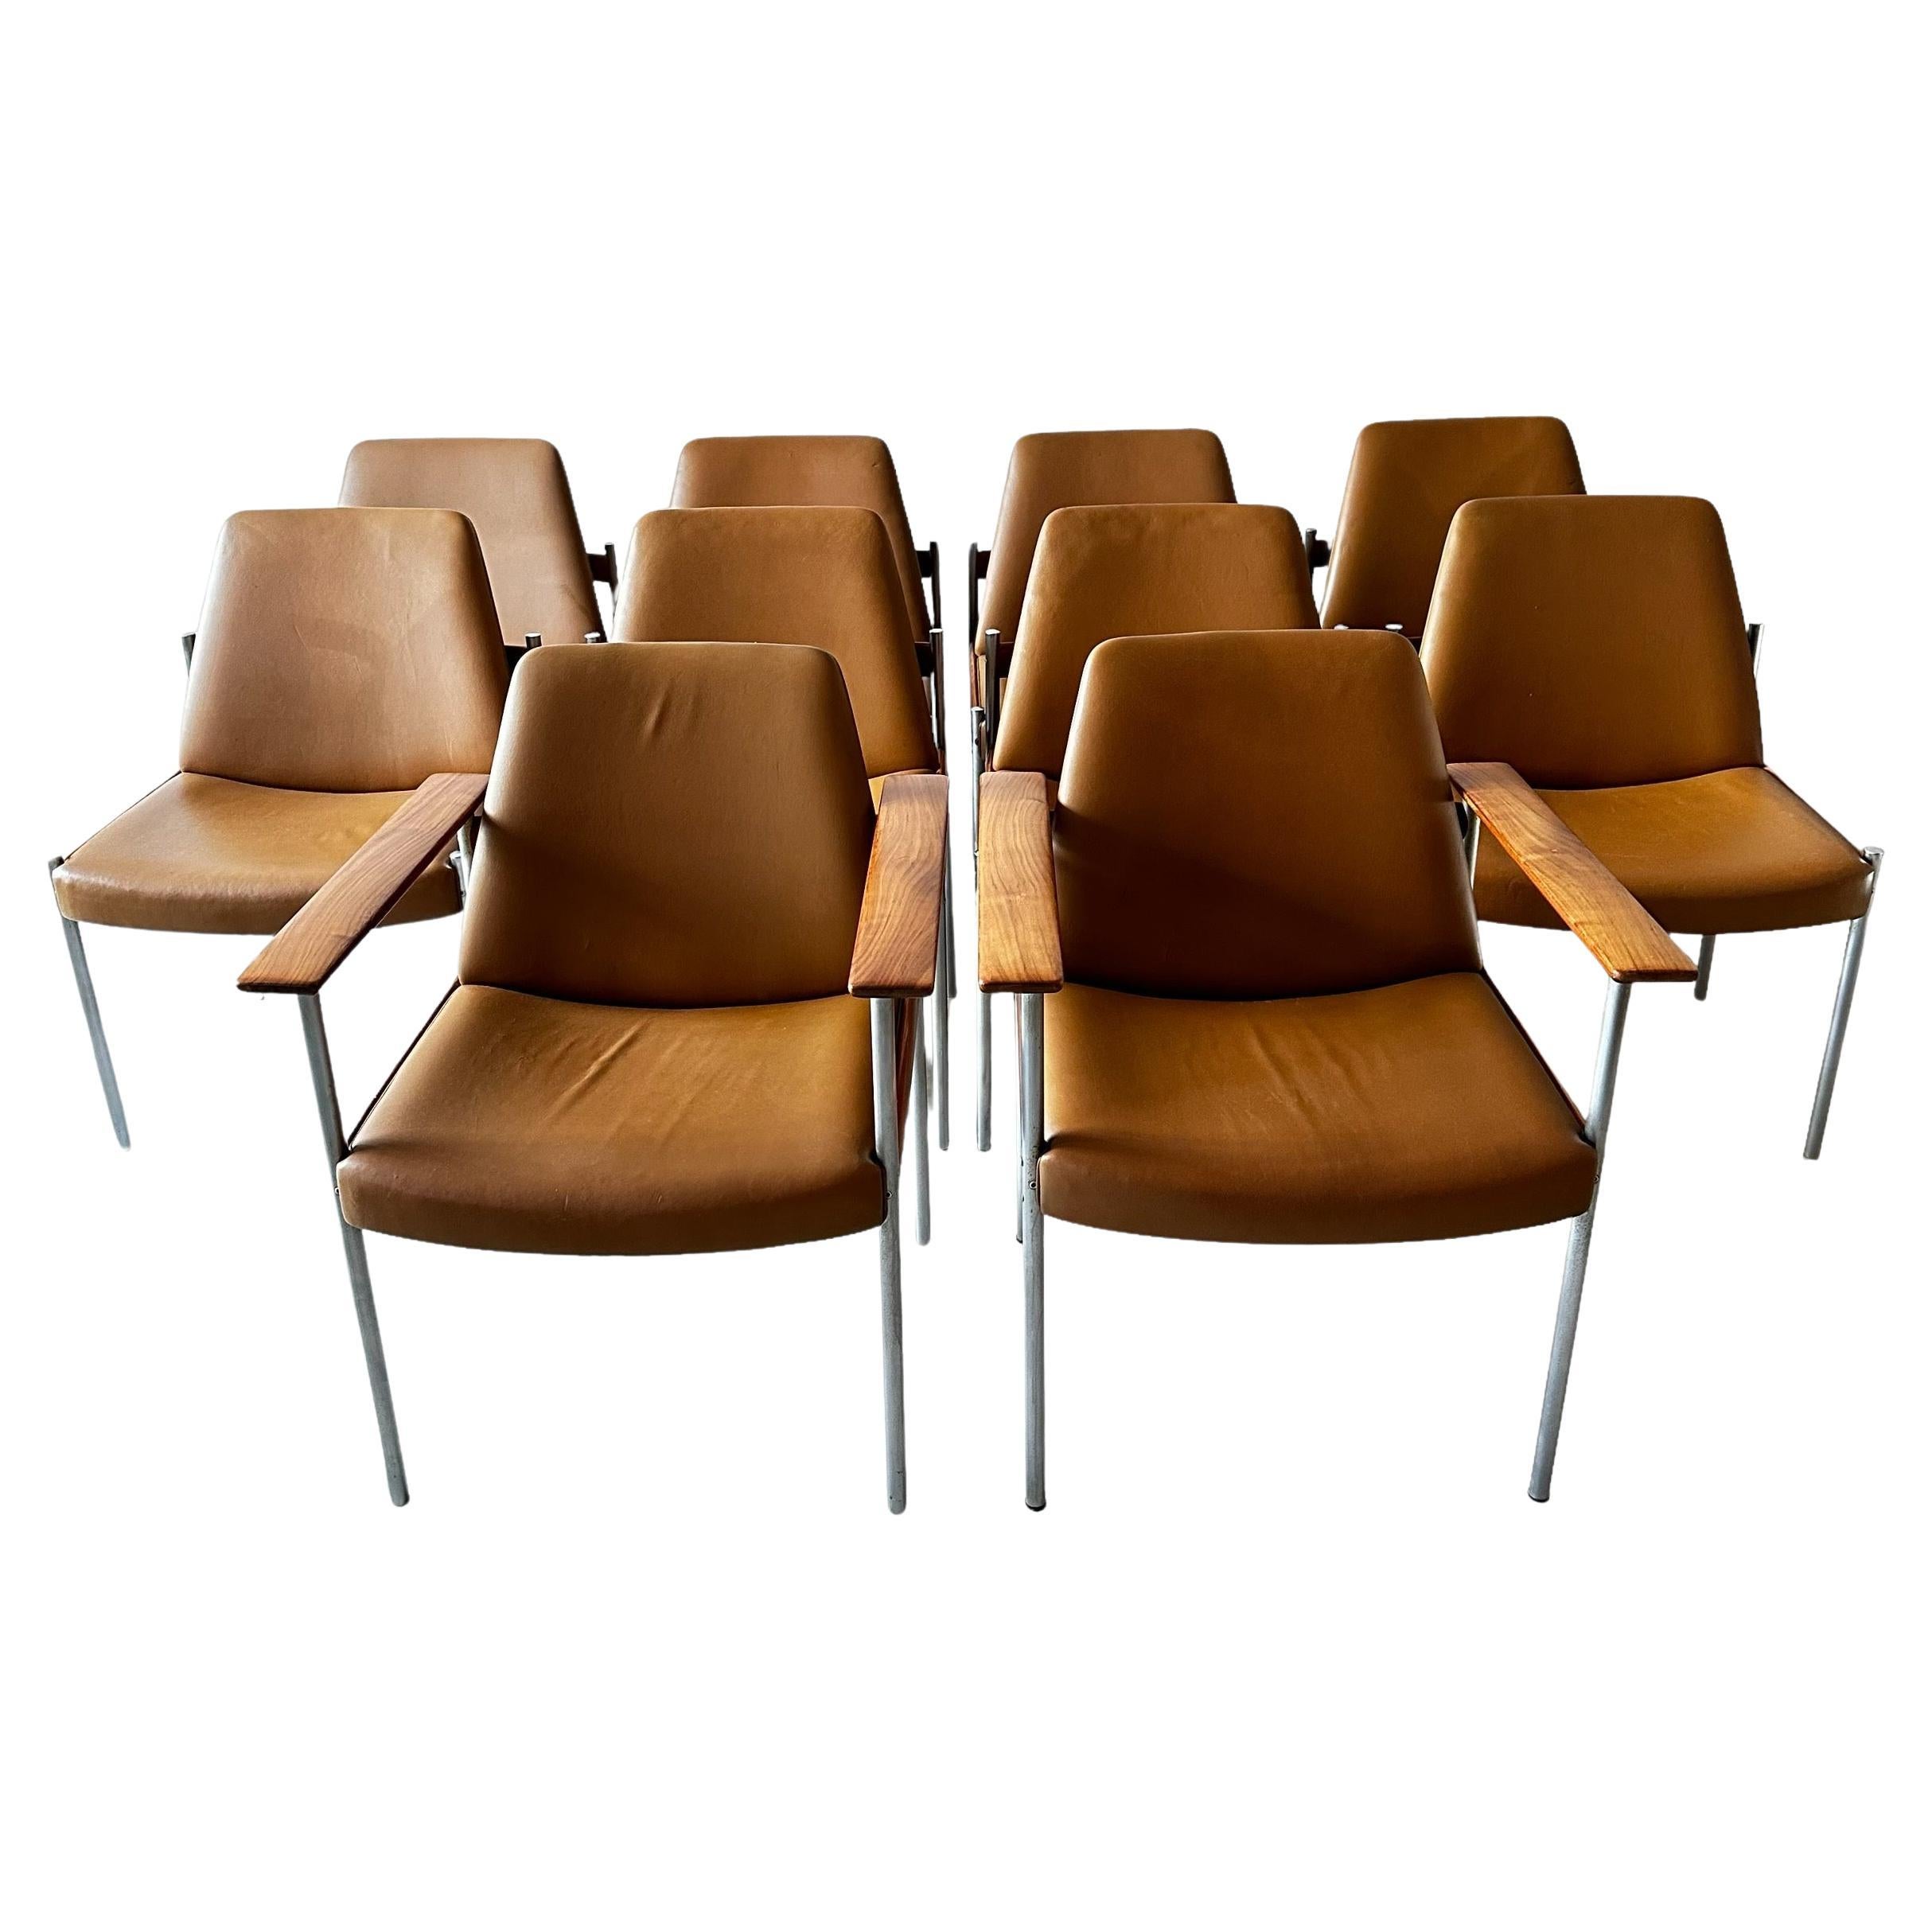 Sven Ivar Dysthe Large Set of 10 Chairs in Cognac Leather and Walnut For Sale